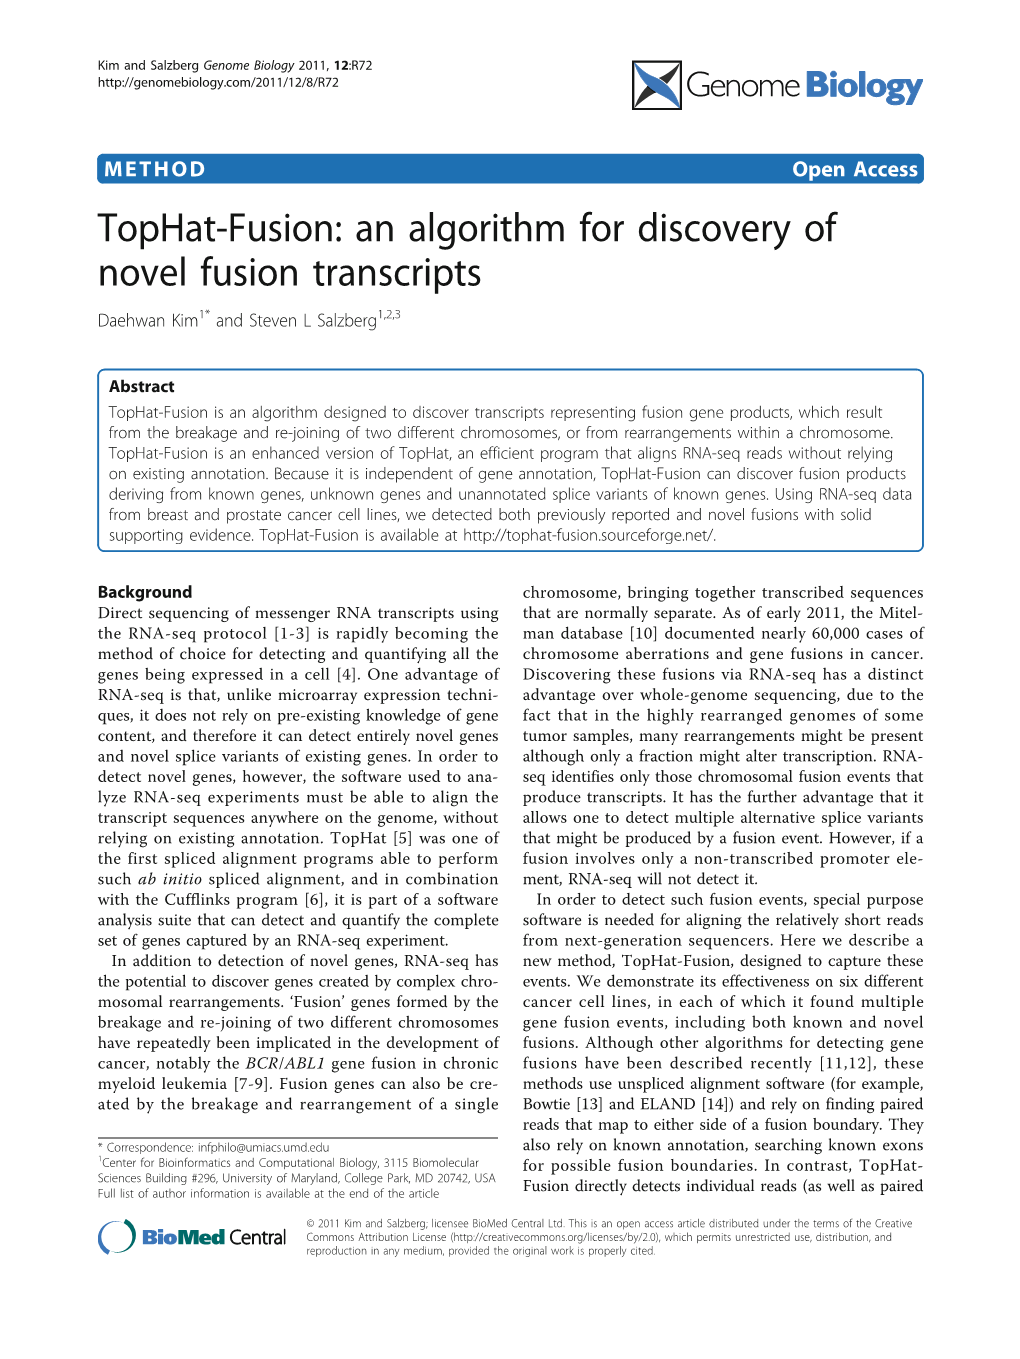 Tophat-Fusion: an Algorithm for Discovery of Novel Fusion Transcripts Daehwan Kim1* and Steven L Salzberg1,2,3